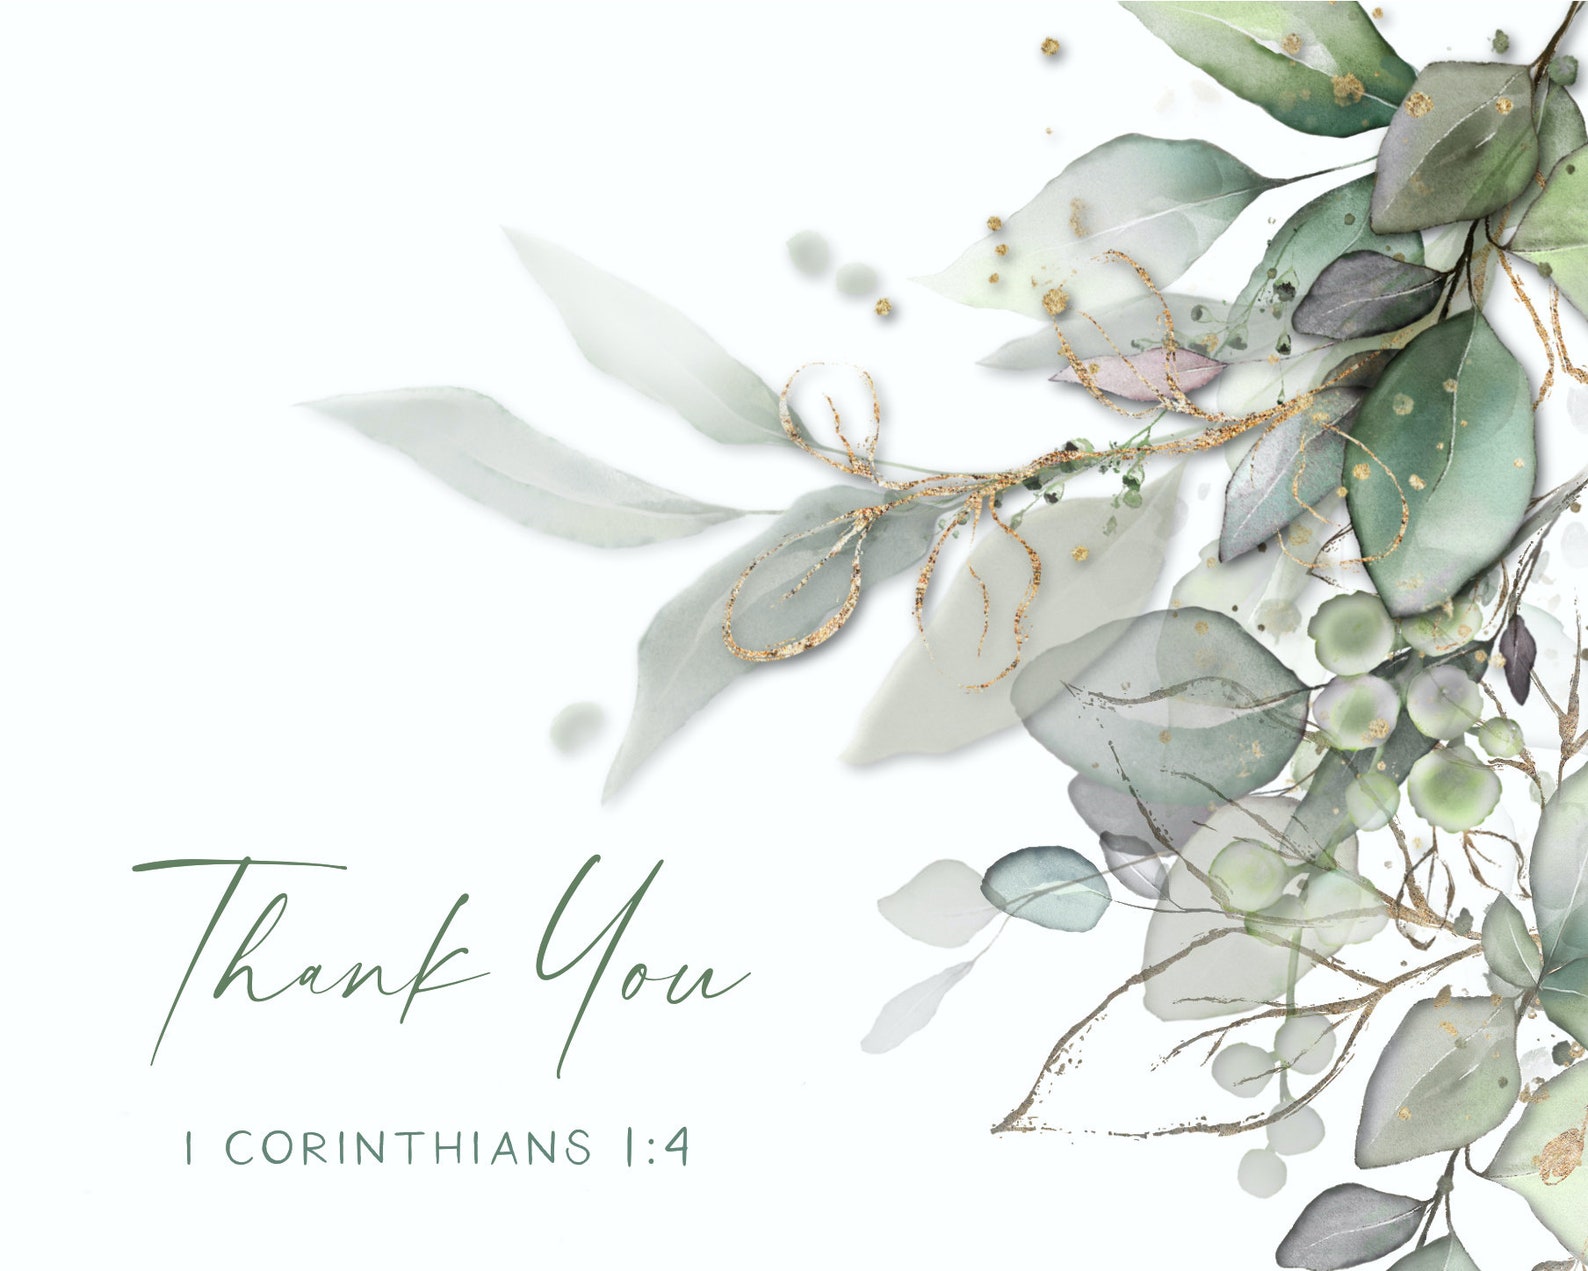 christian-thank-you-cards-8-thank-you-cards-8-thank-you-note-etsy